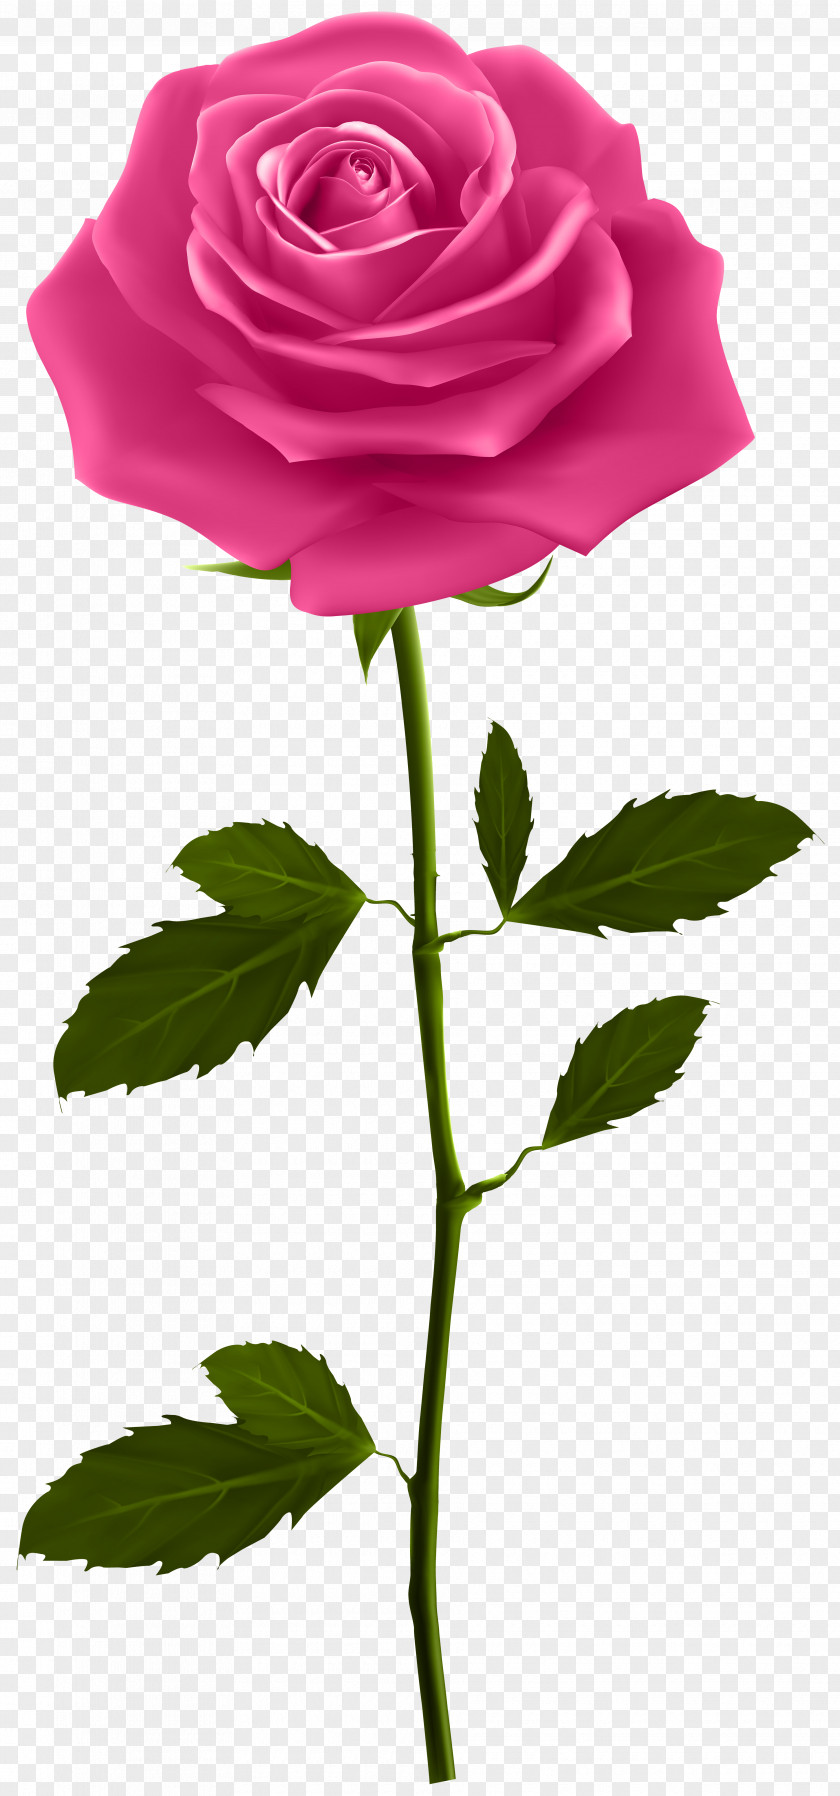 Pink Rose With Stem Clip Art Image Plant PNG